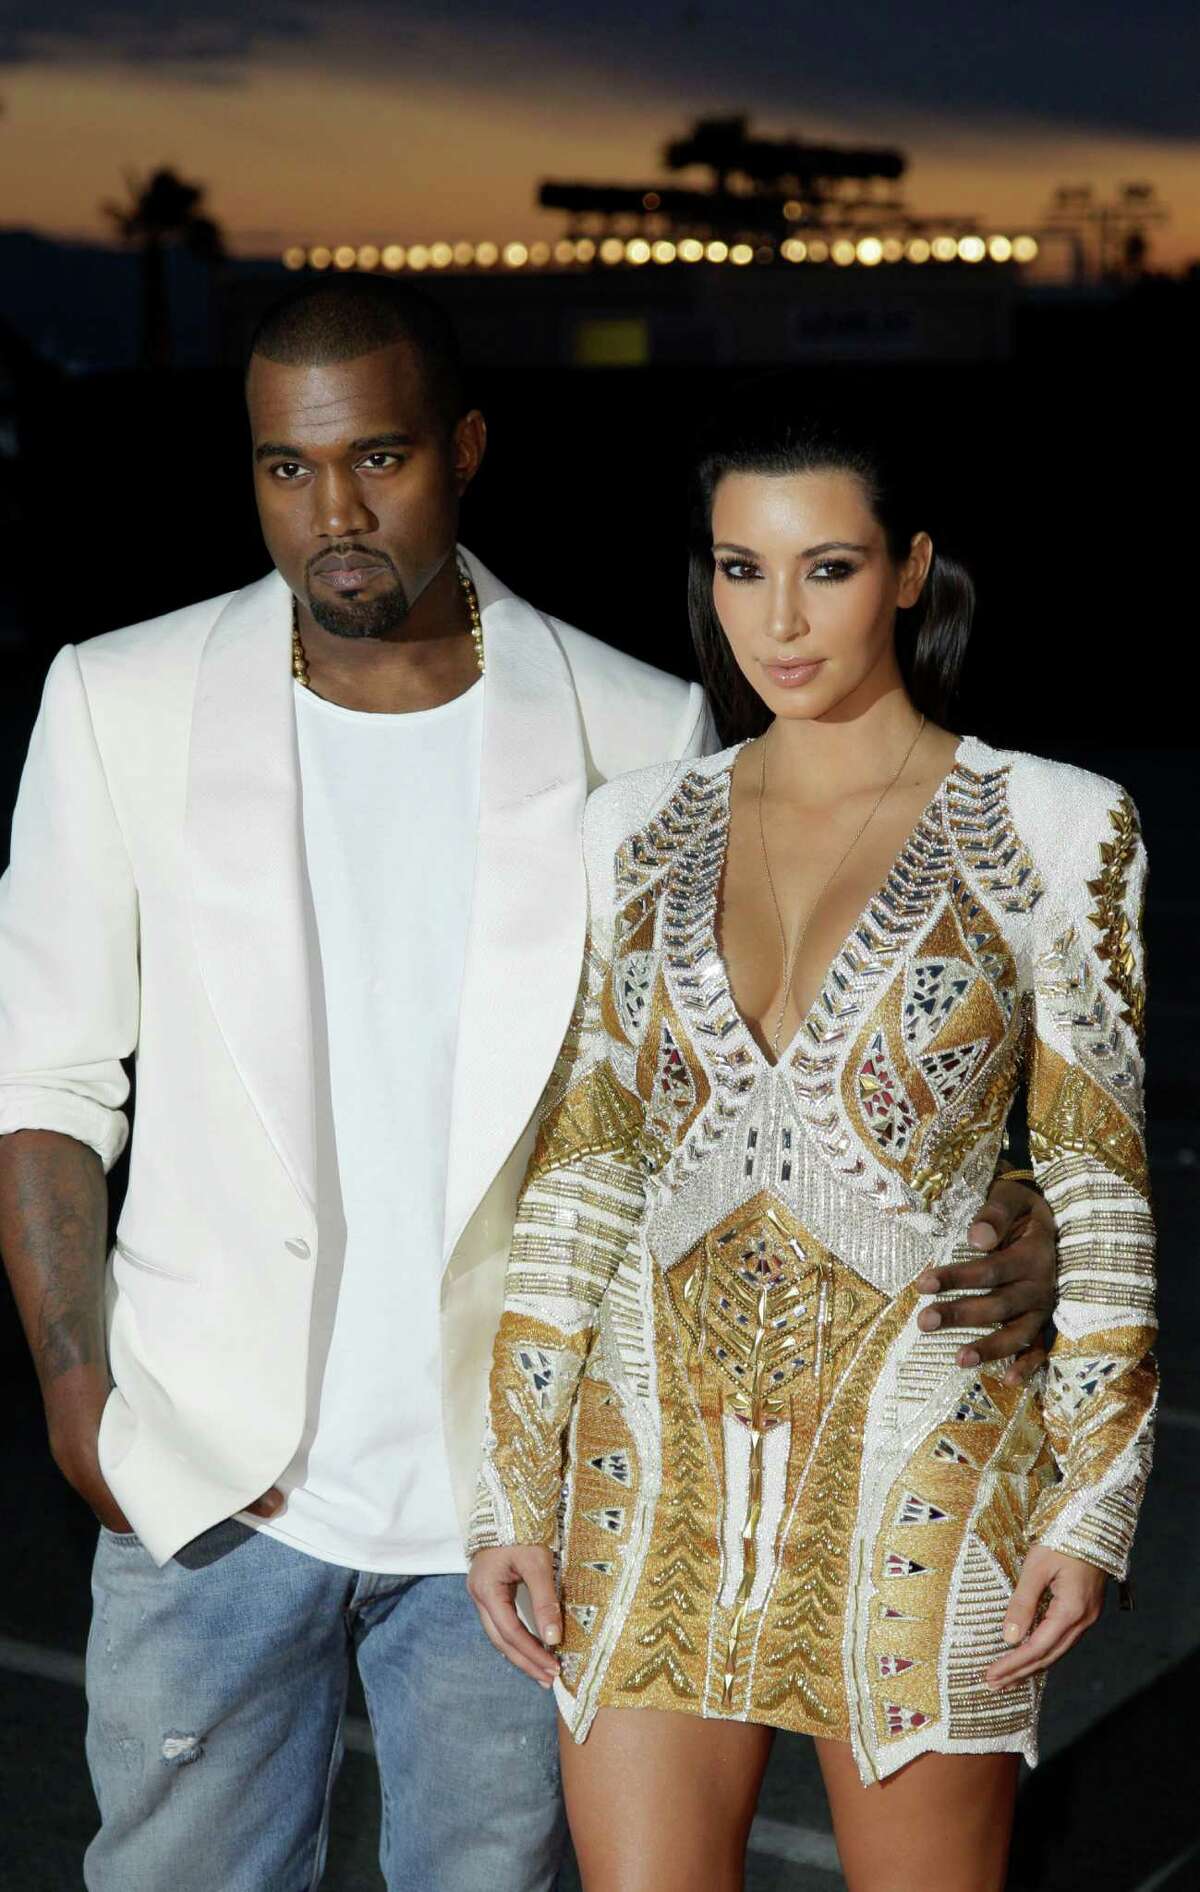 FILE - In this May 23, 2012 file photo, singer Kanye West, left, and television personality Kim Kardashian arrive for the screening of "Cruel Summer" at the 65th international film festival, in Cannes, southern France. Now that Beyonce and Jay-Z have confirmed that they're attending the BET Awards, on Sunday, July 1, 2012, the next question is: Will West be the third wheel, or will his girlfriend Kardashian be on his arm? (AP Photo/Francois Mori, File)